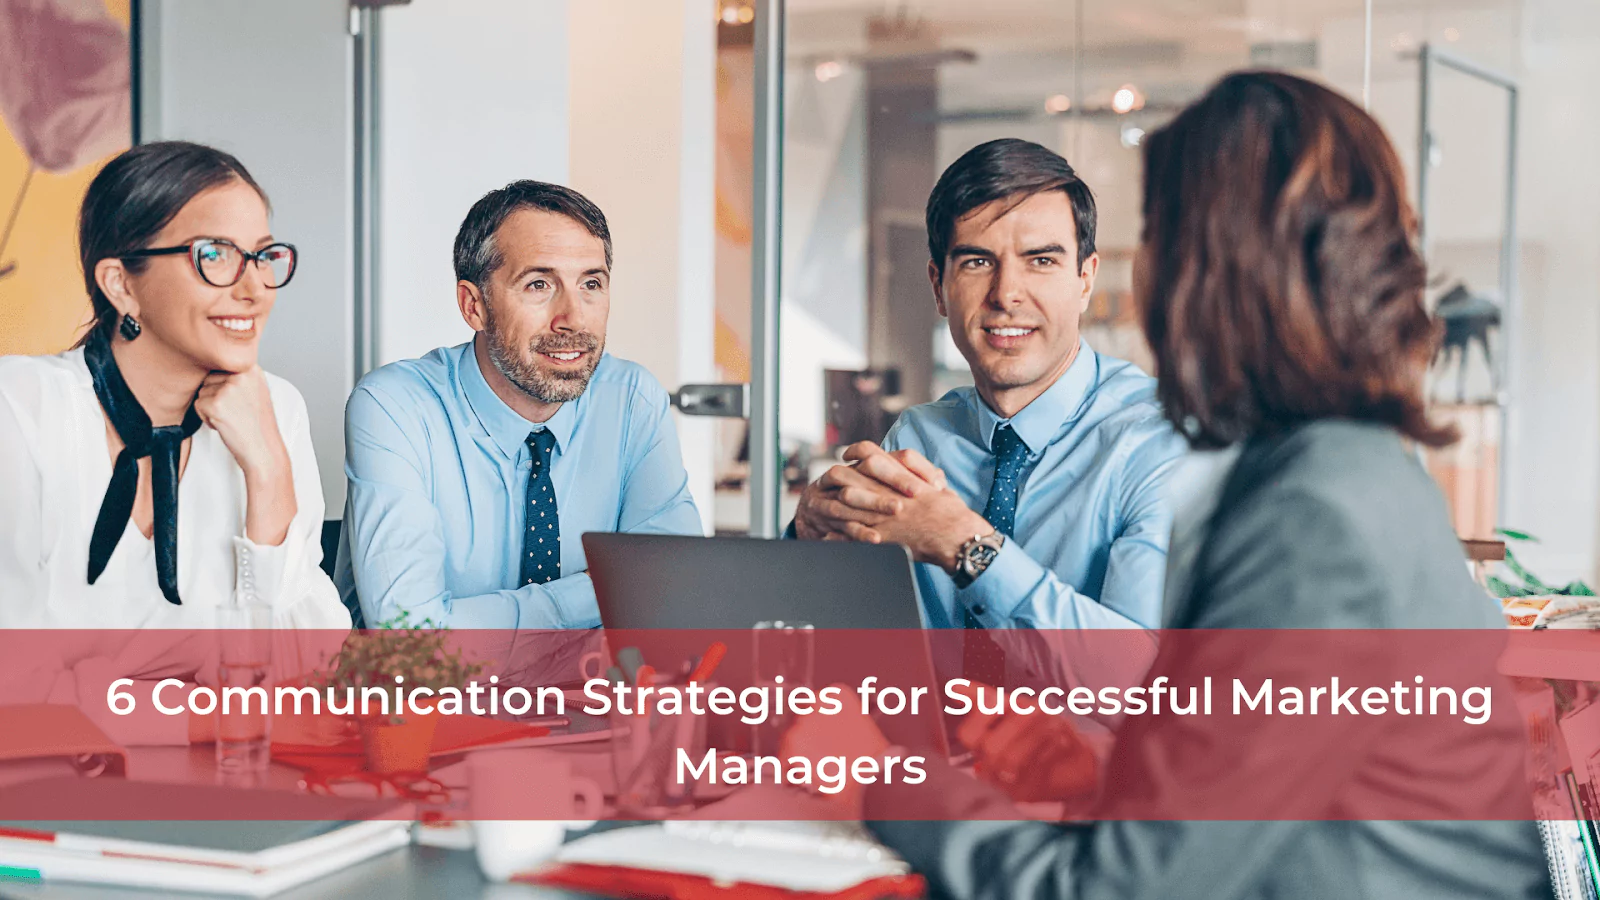 6 Communication Strategies for Successful Marketing Managers